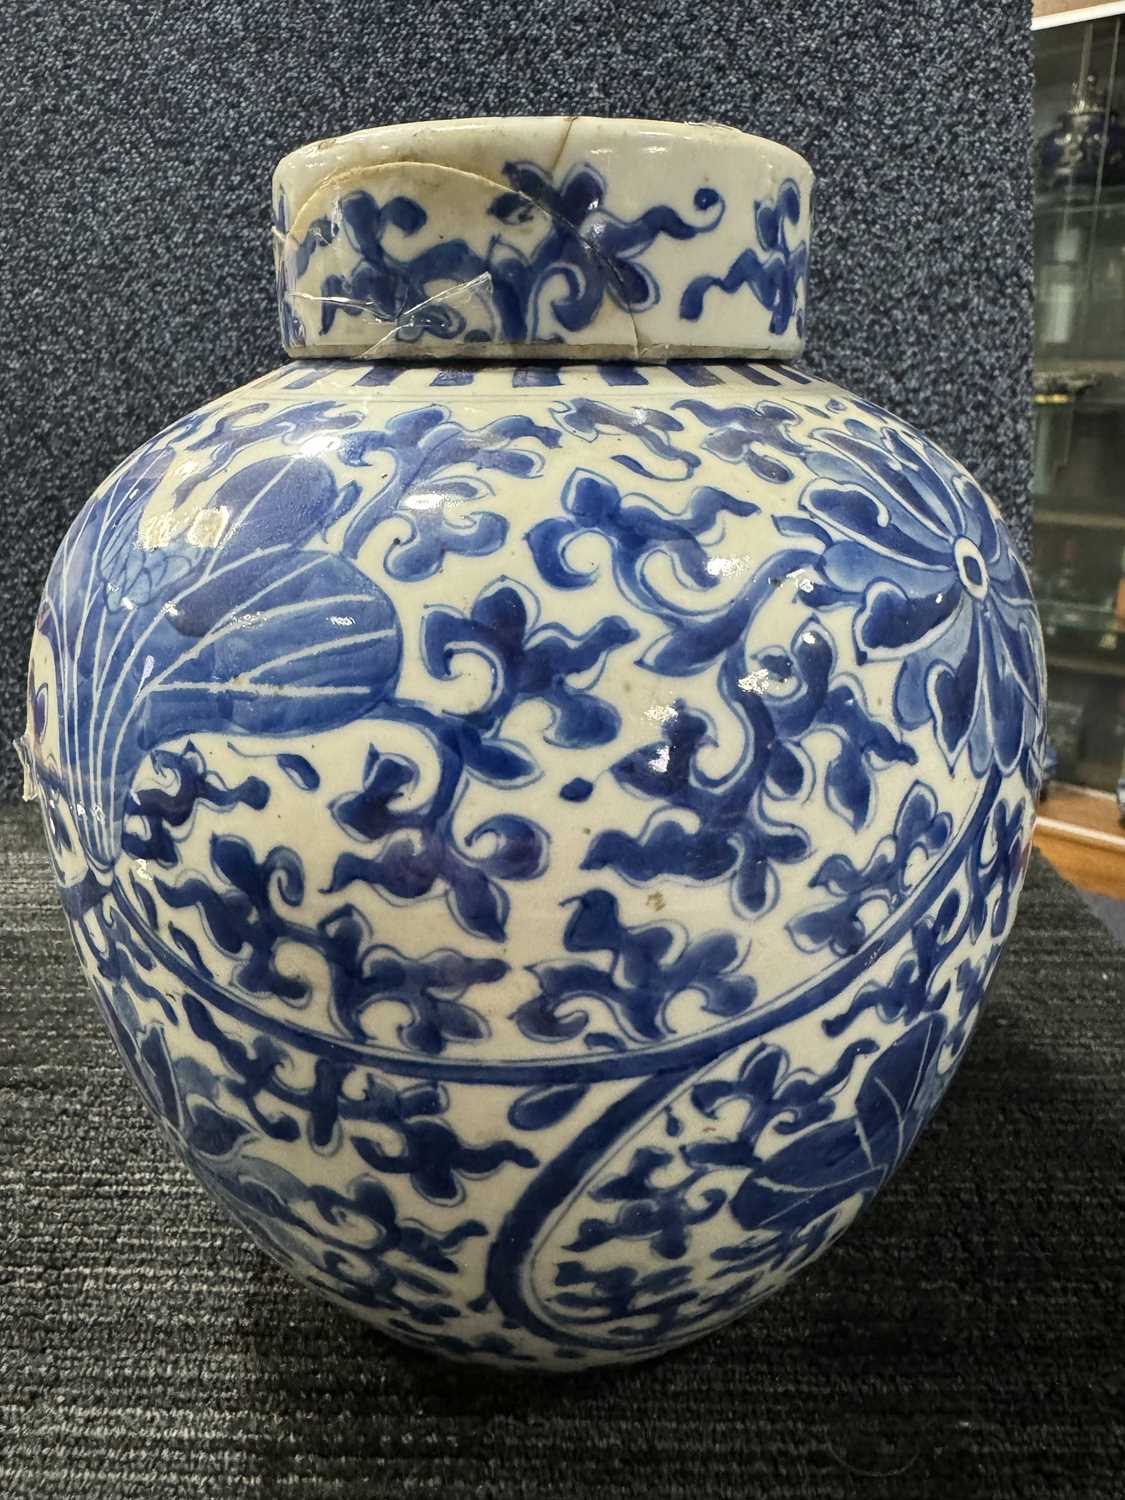 LATE 19TH/EARLY 20TH CENTURY CHINESE BLUE AND WHITE LIDDED GINGER JAR, GUANGXU PERIOD (1875-1908) - Image 5 of 9